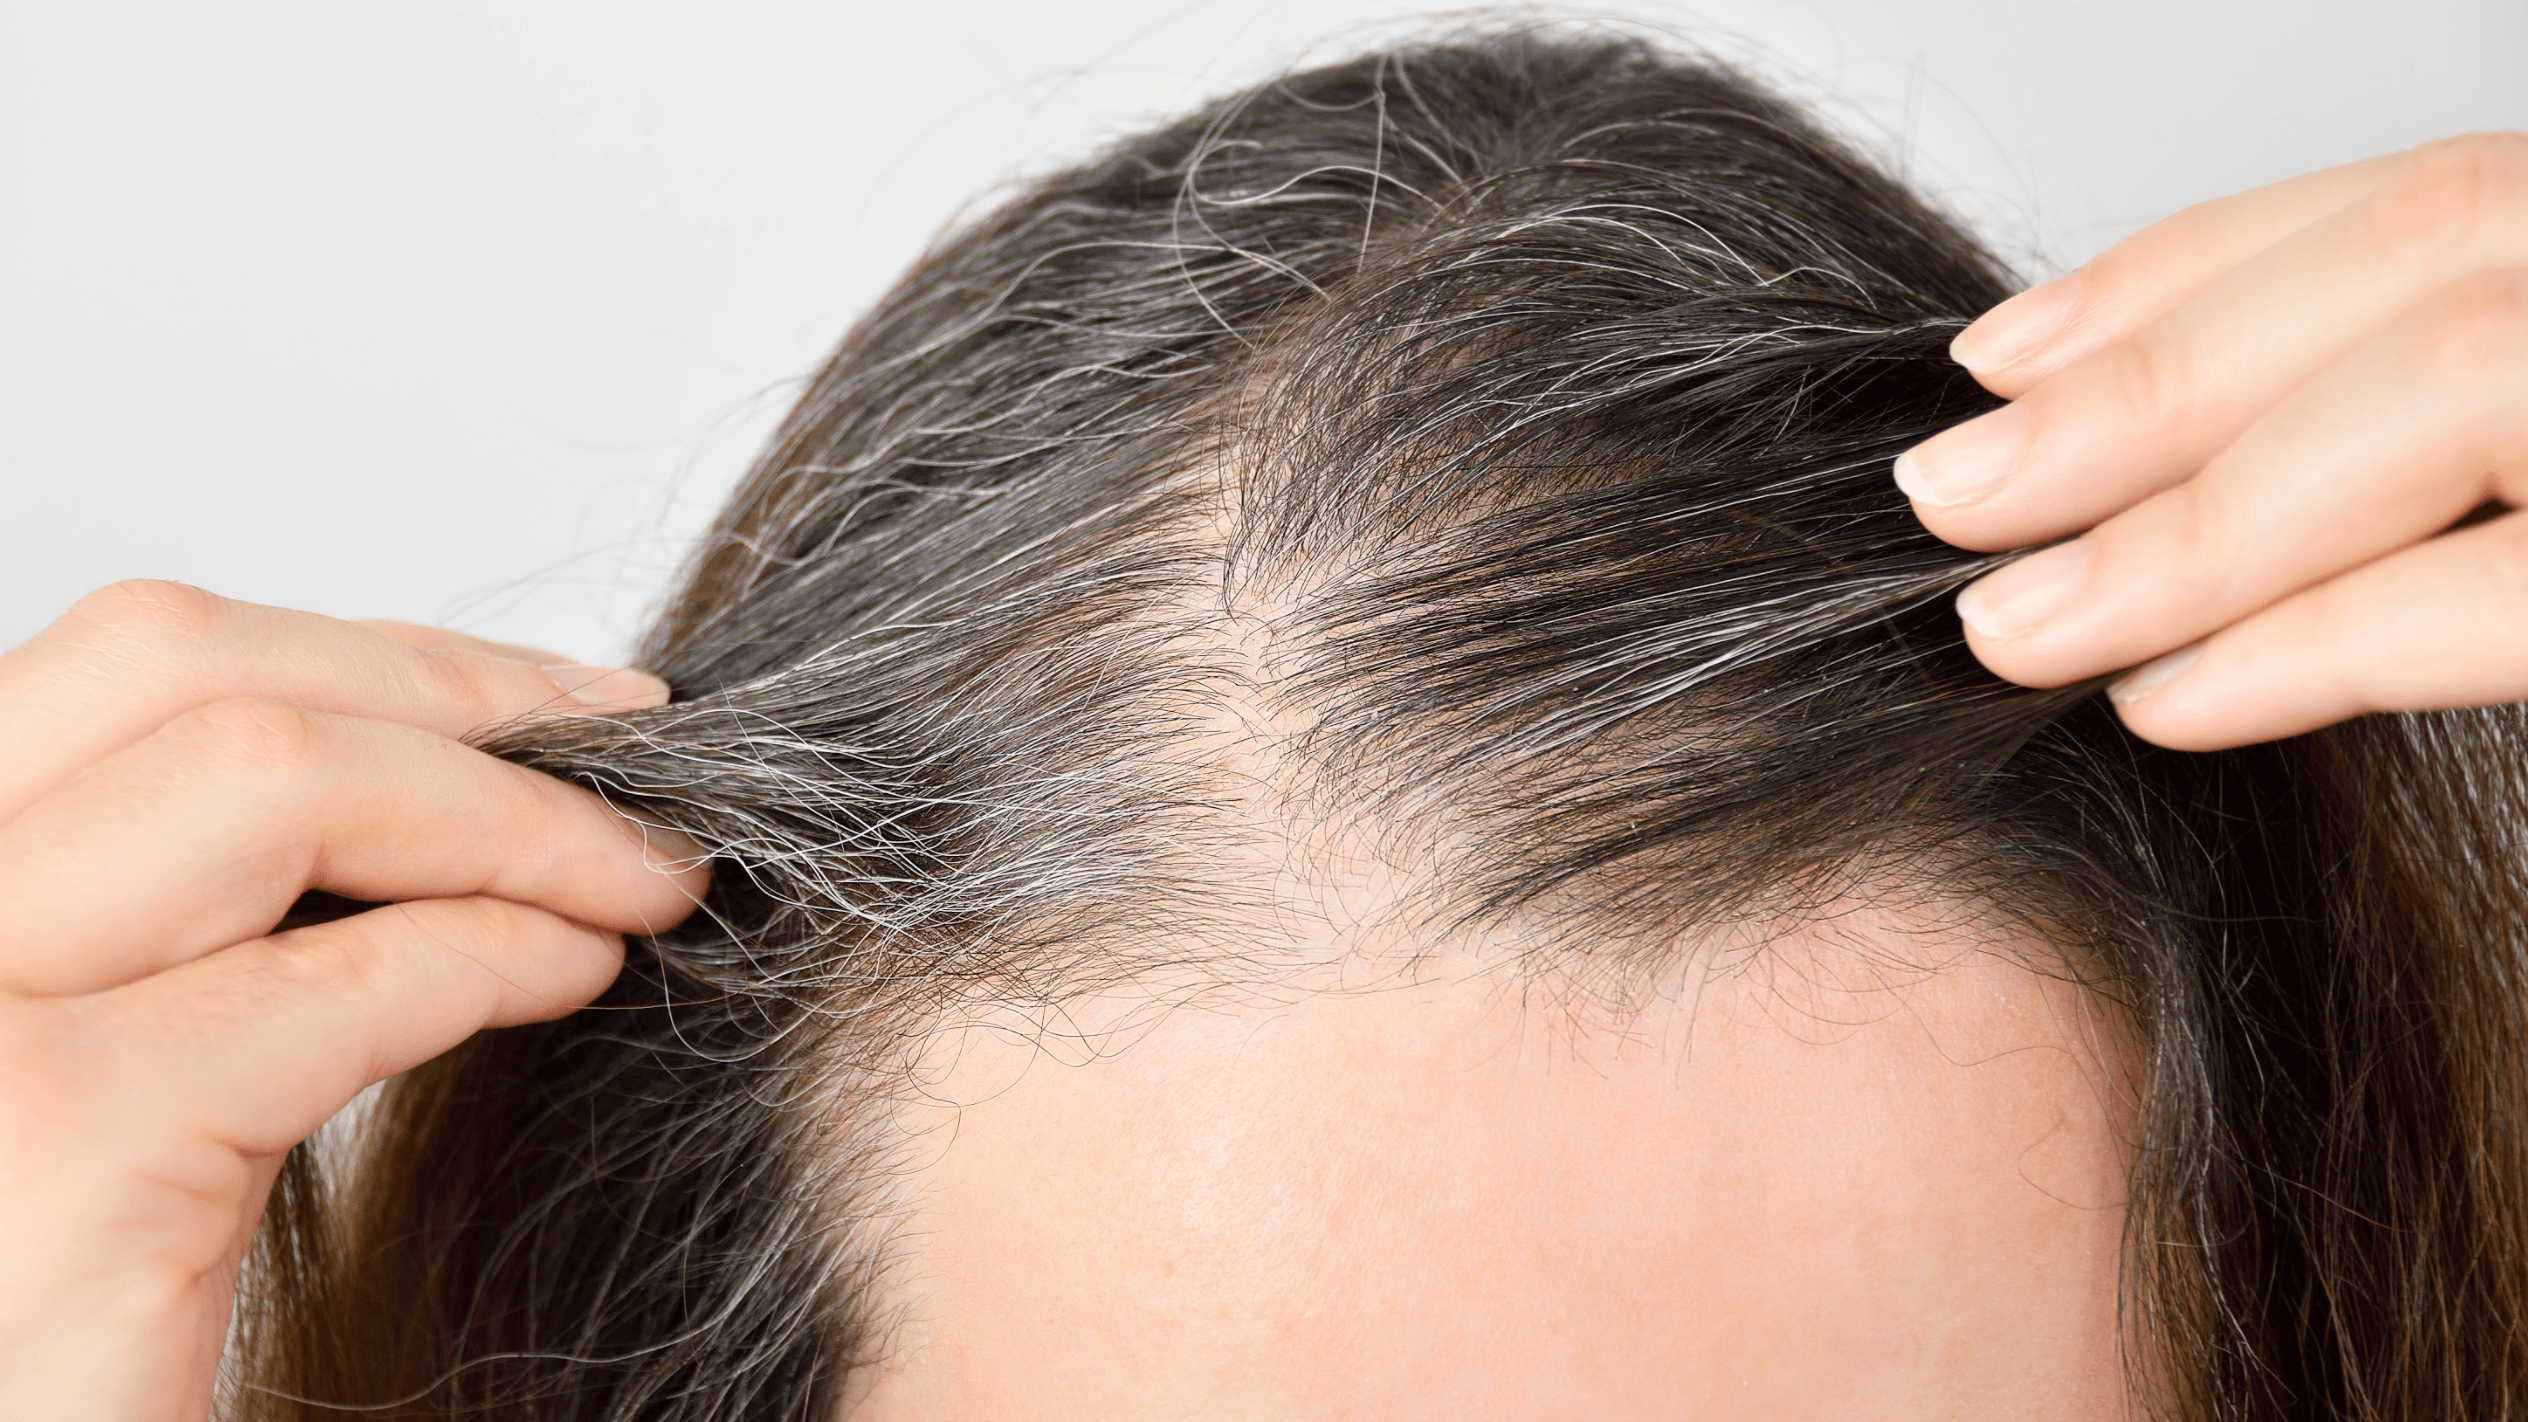 Is a NeoGraft Hair Transplant Suitable for Women?